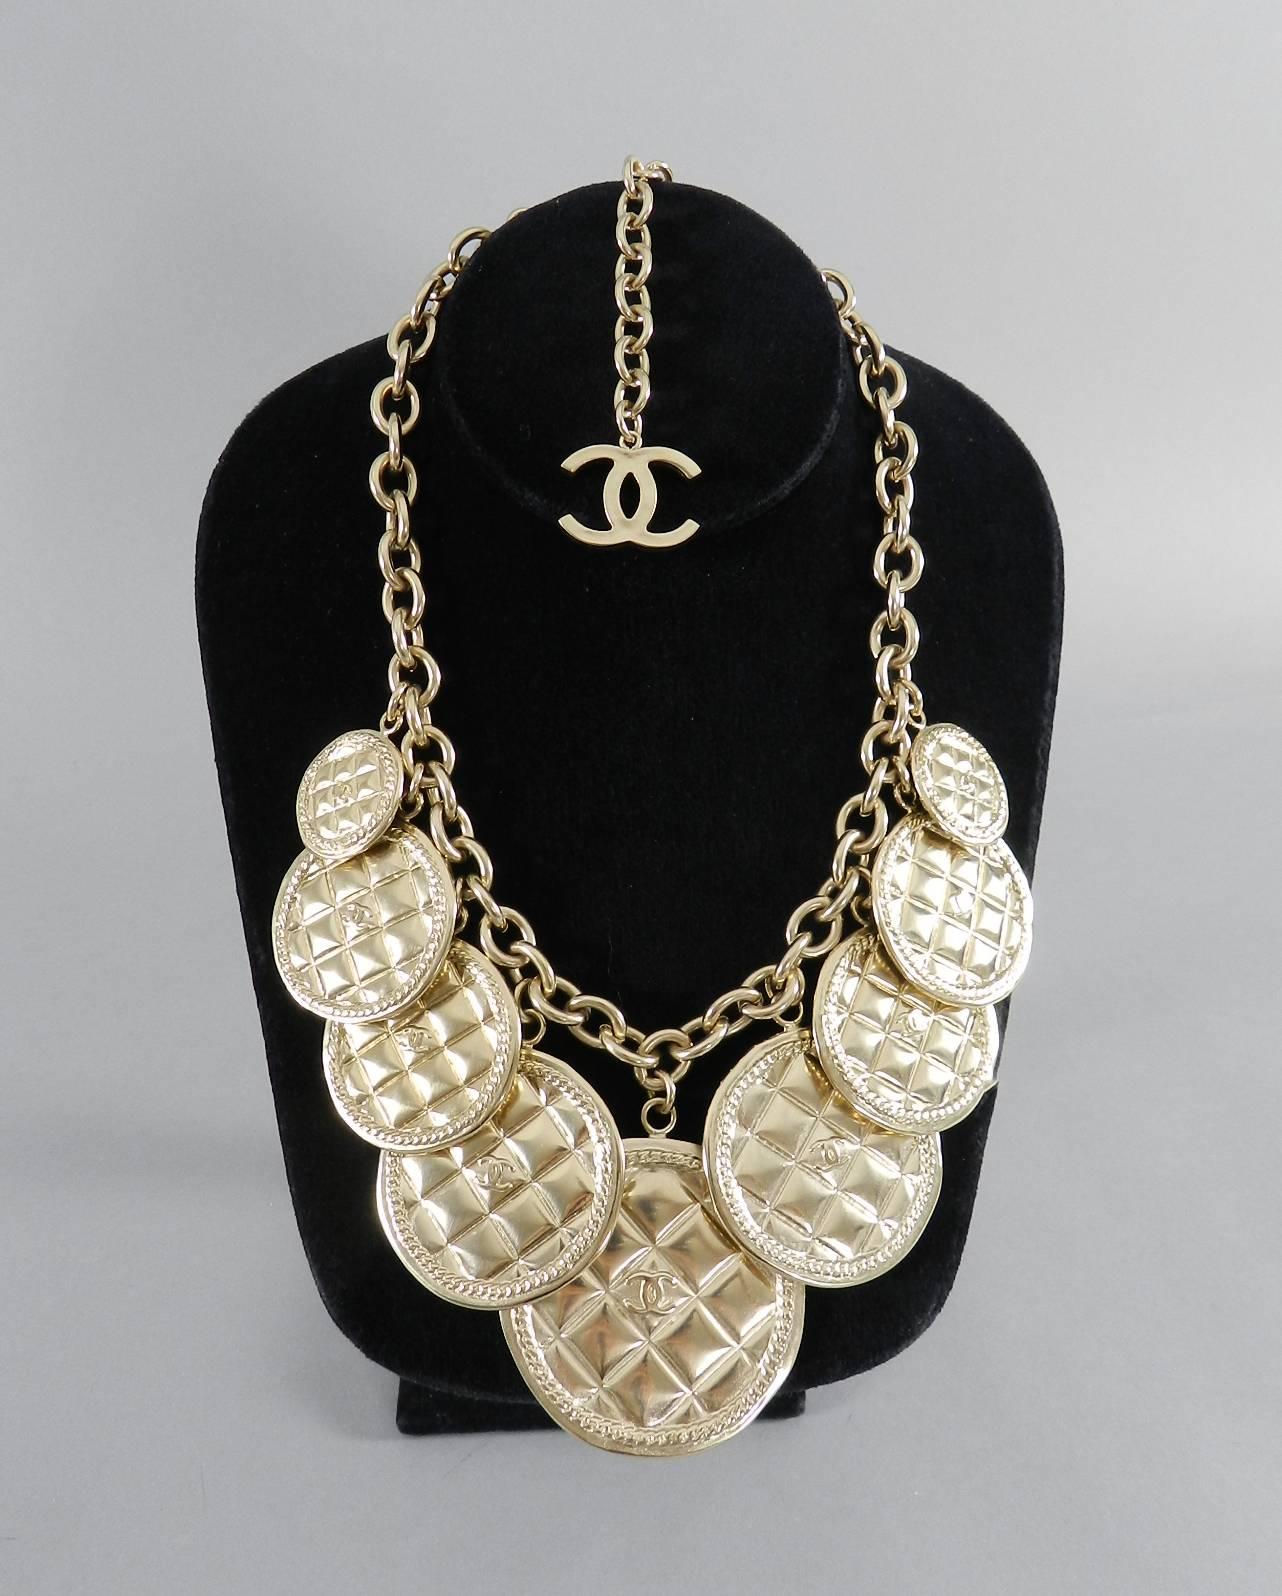 Chanel 2015 fall 15k Runway Gold Coin Necklace -  new in box with $2275 retail tag attached. Maximum length is 19.5